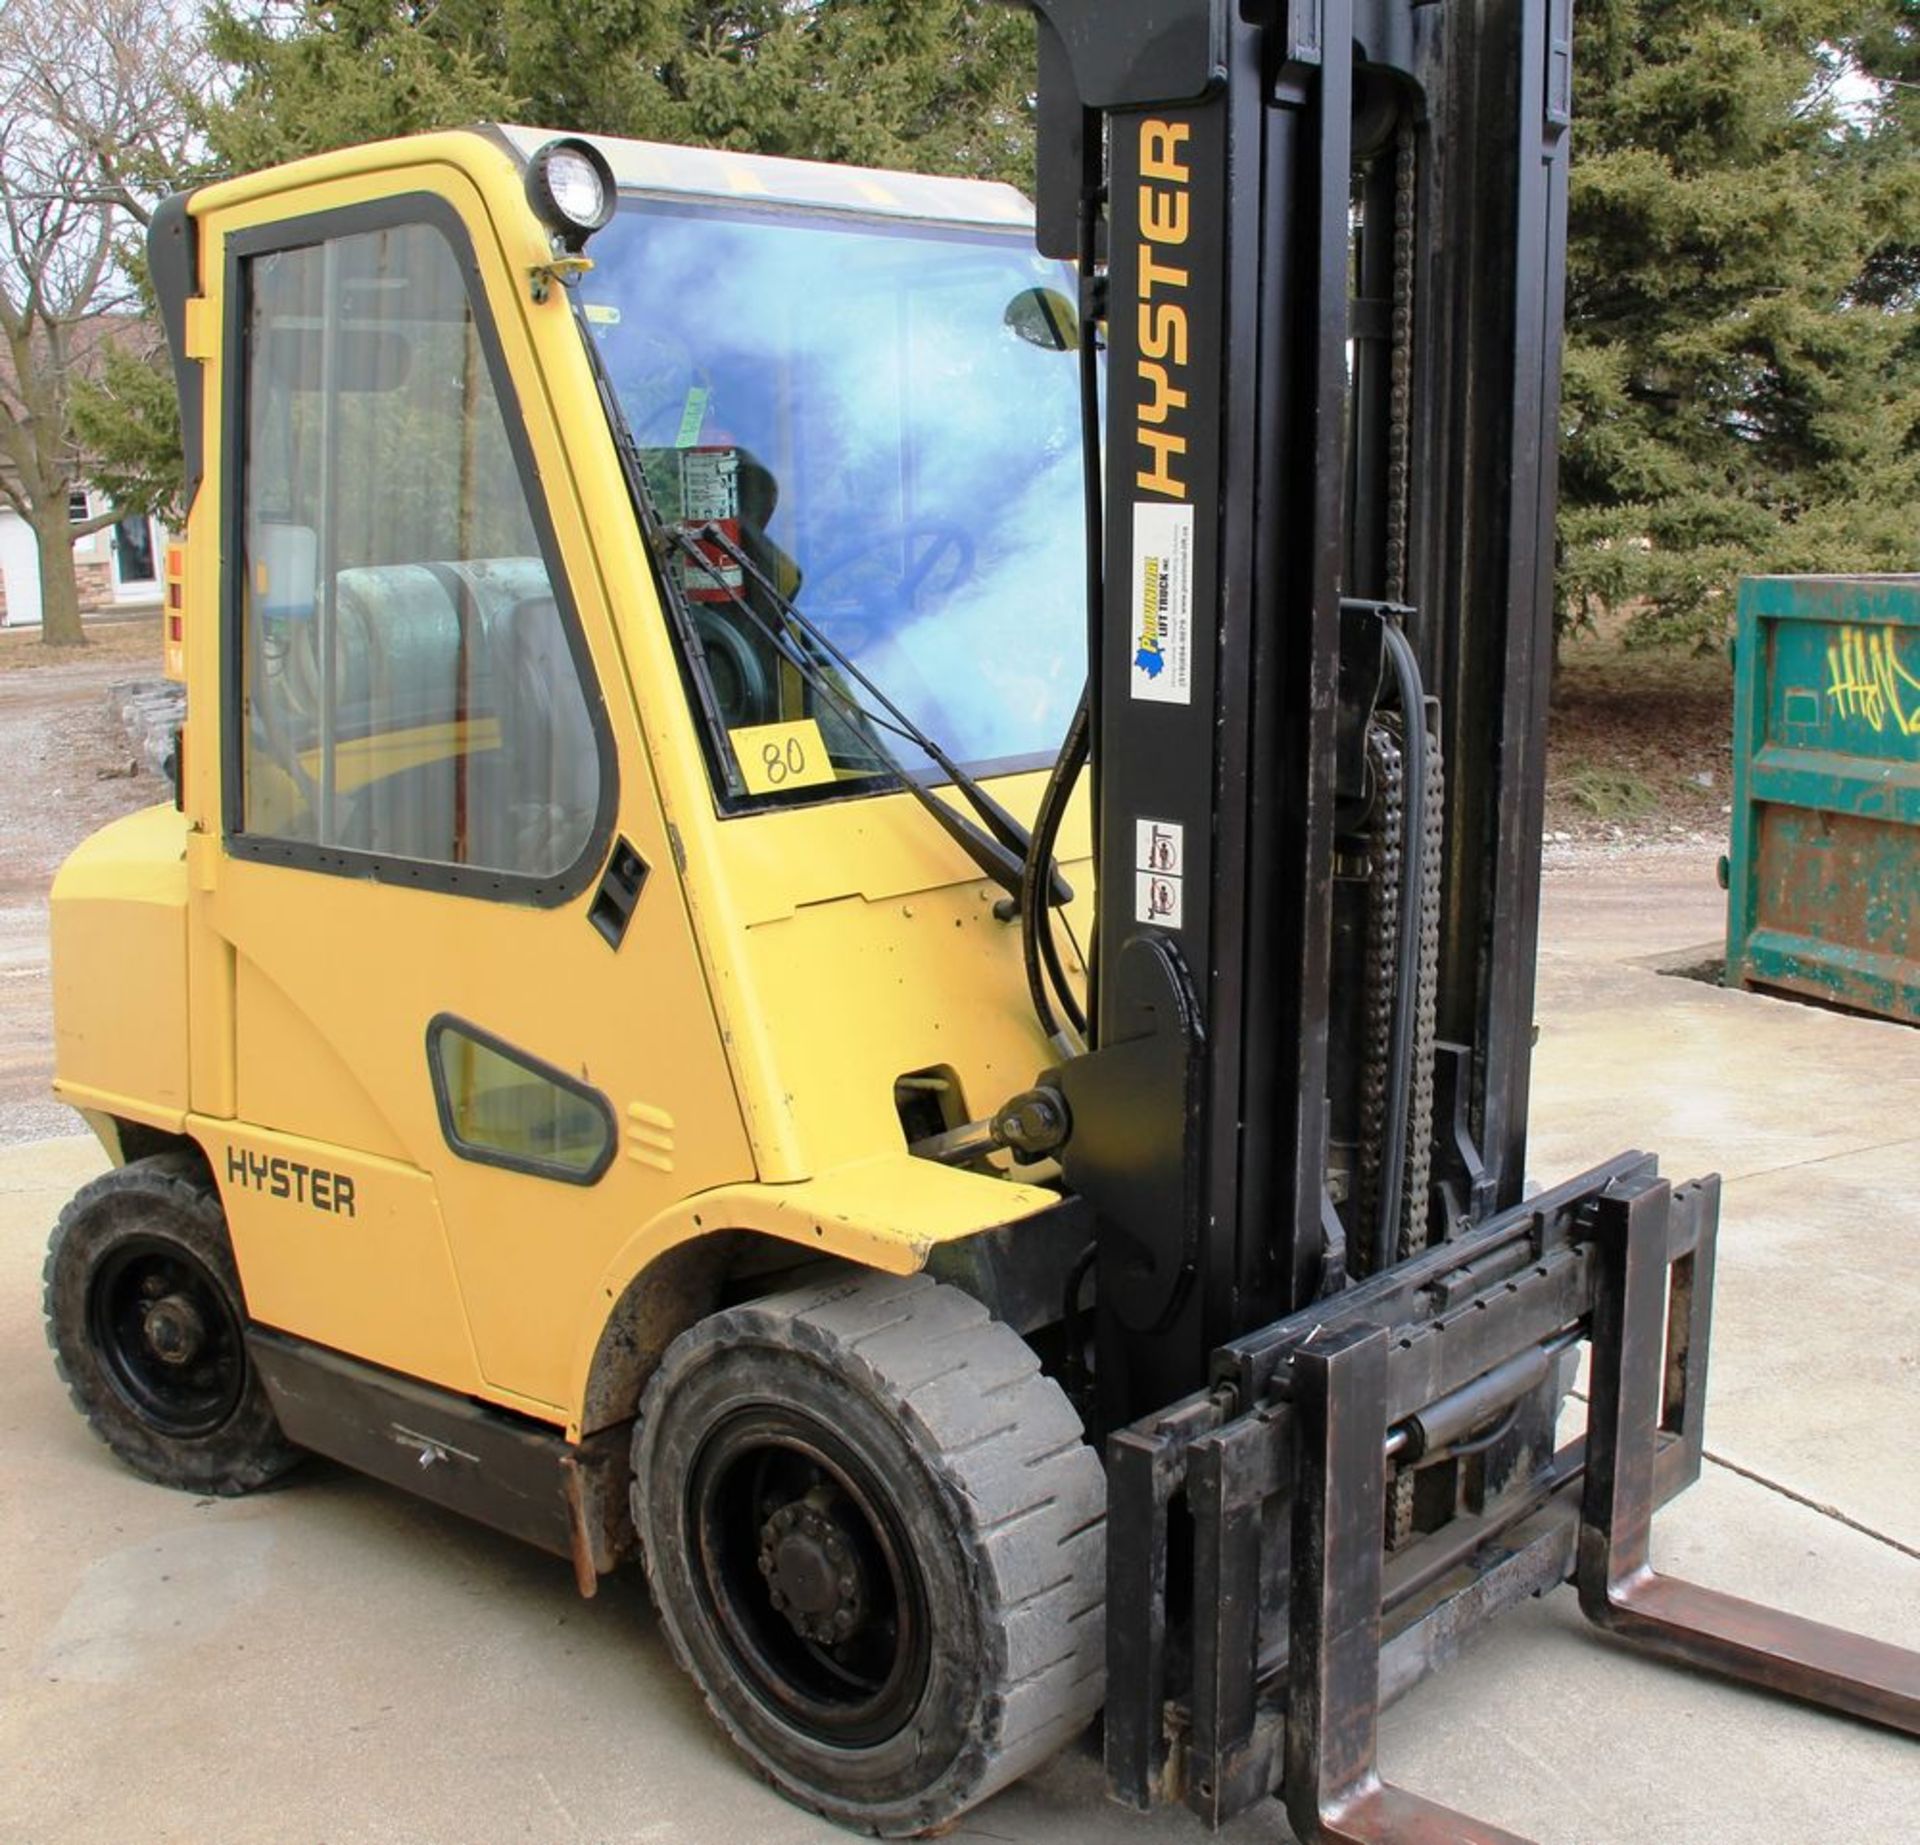 HYSTER H80XM LP POWERED FORKLIFT, 7300 LBS CAPACITY, 3310 KG CAPACITY, 194.9" LIFT, ENCLOSED CAB, - Image 6 of 7